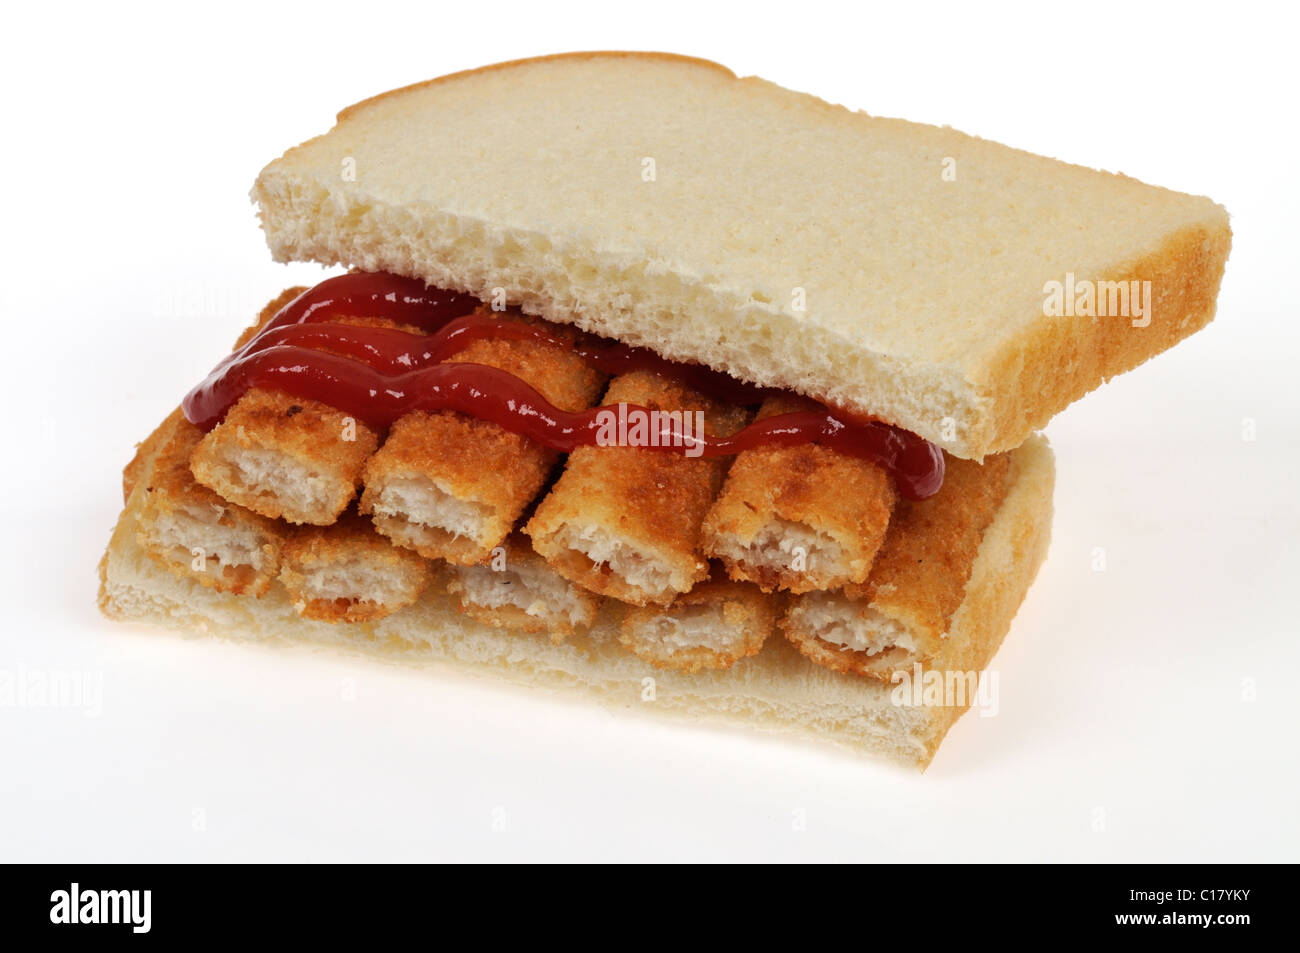 fish-finger-sandwich-with-white-bread-an